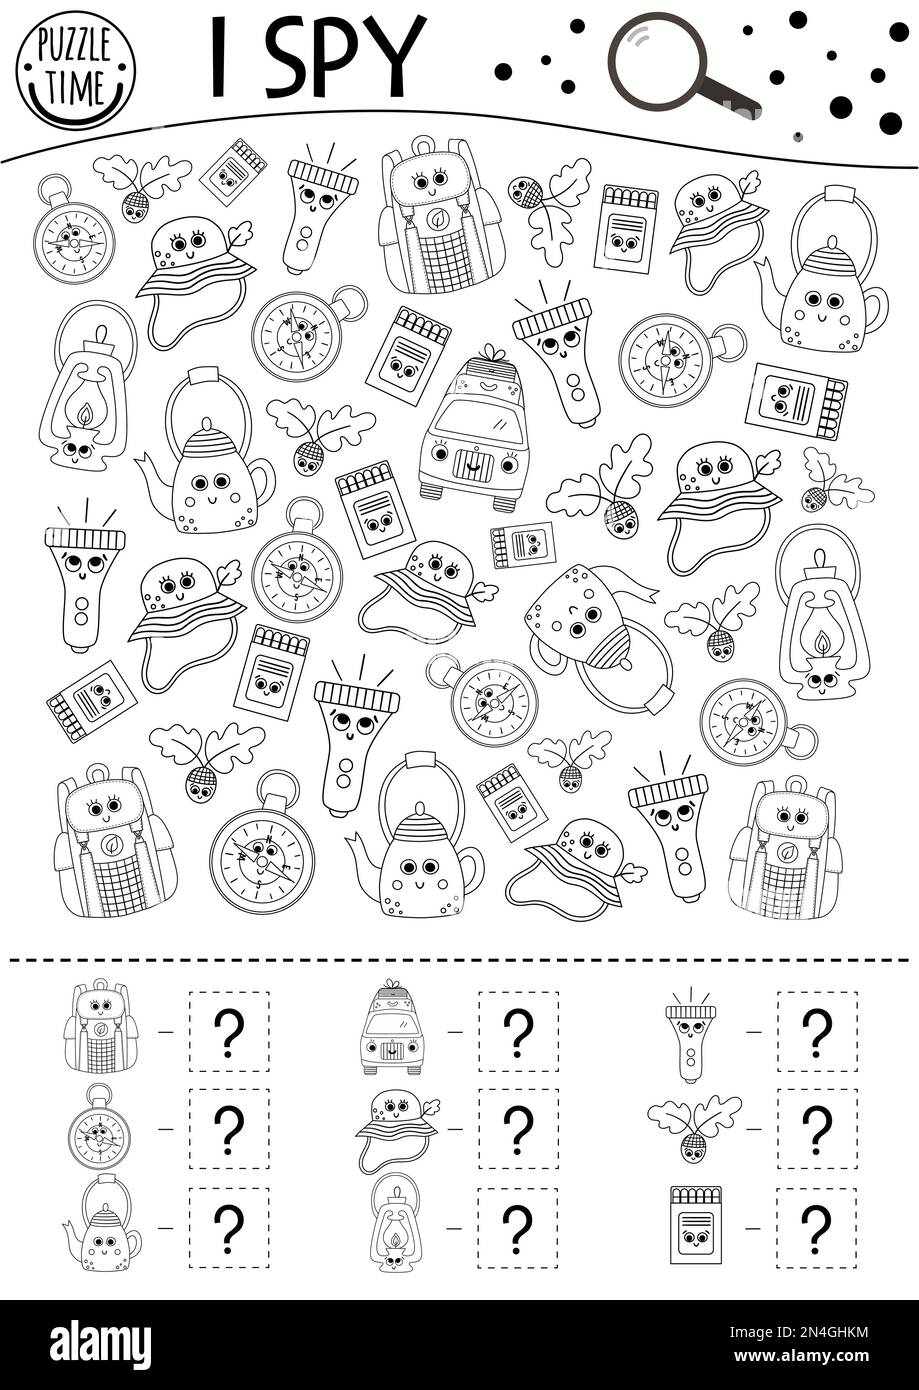 Camping i spy black and white game for kids searching and counting outline activity or coloring page with summer camp equipment funny printable work stock vector image art